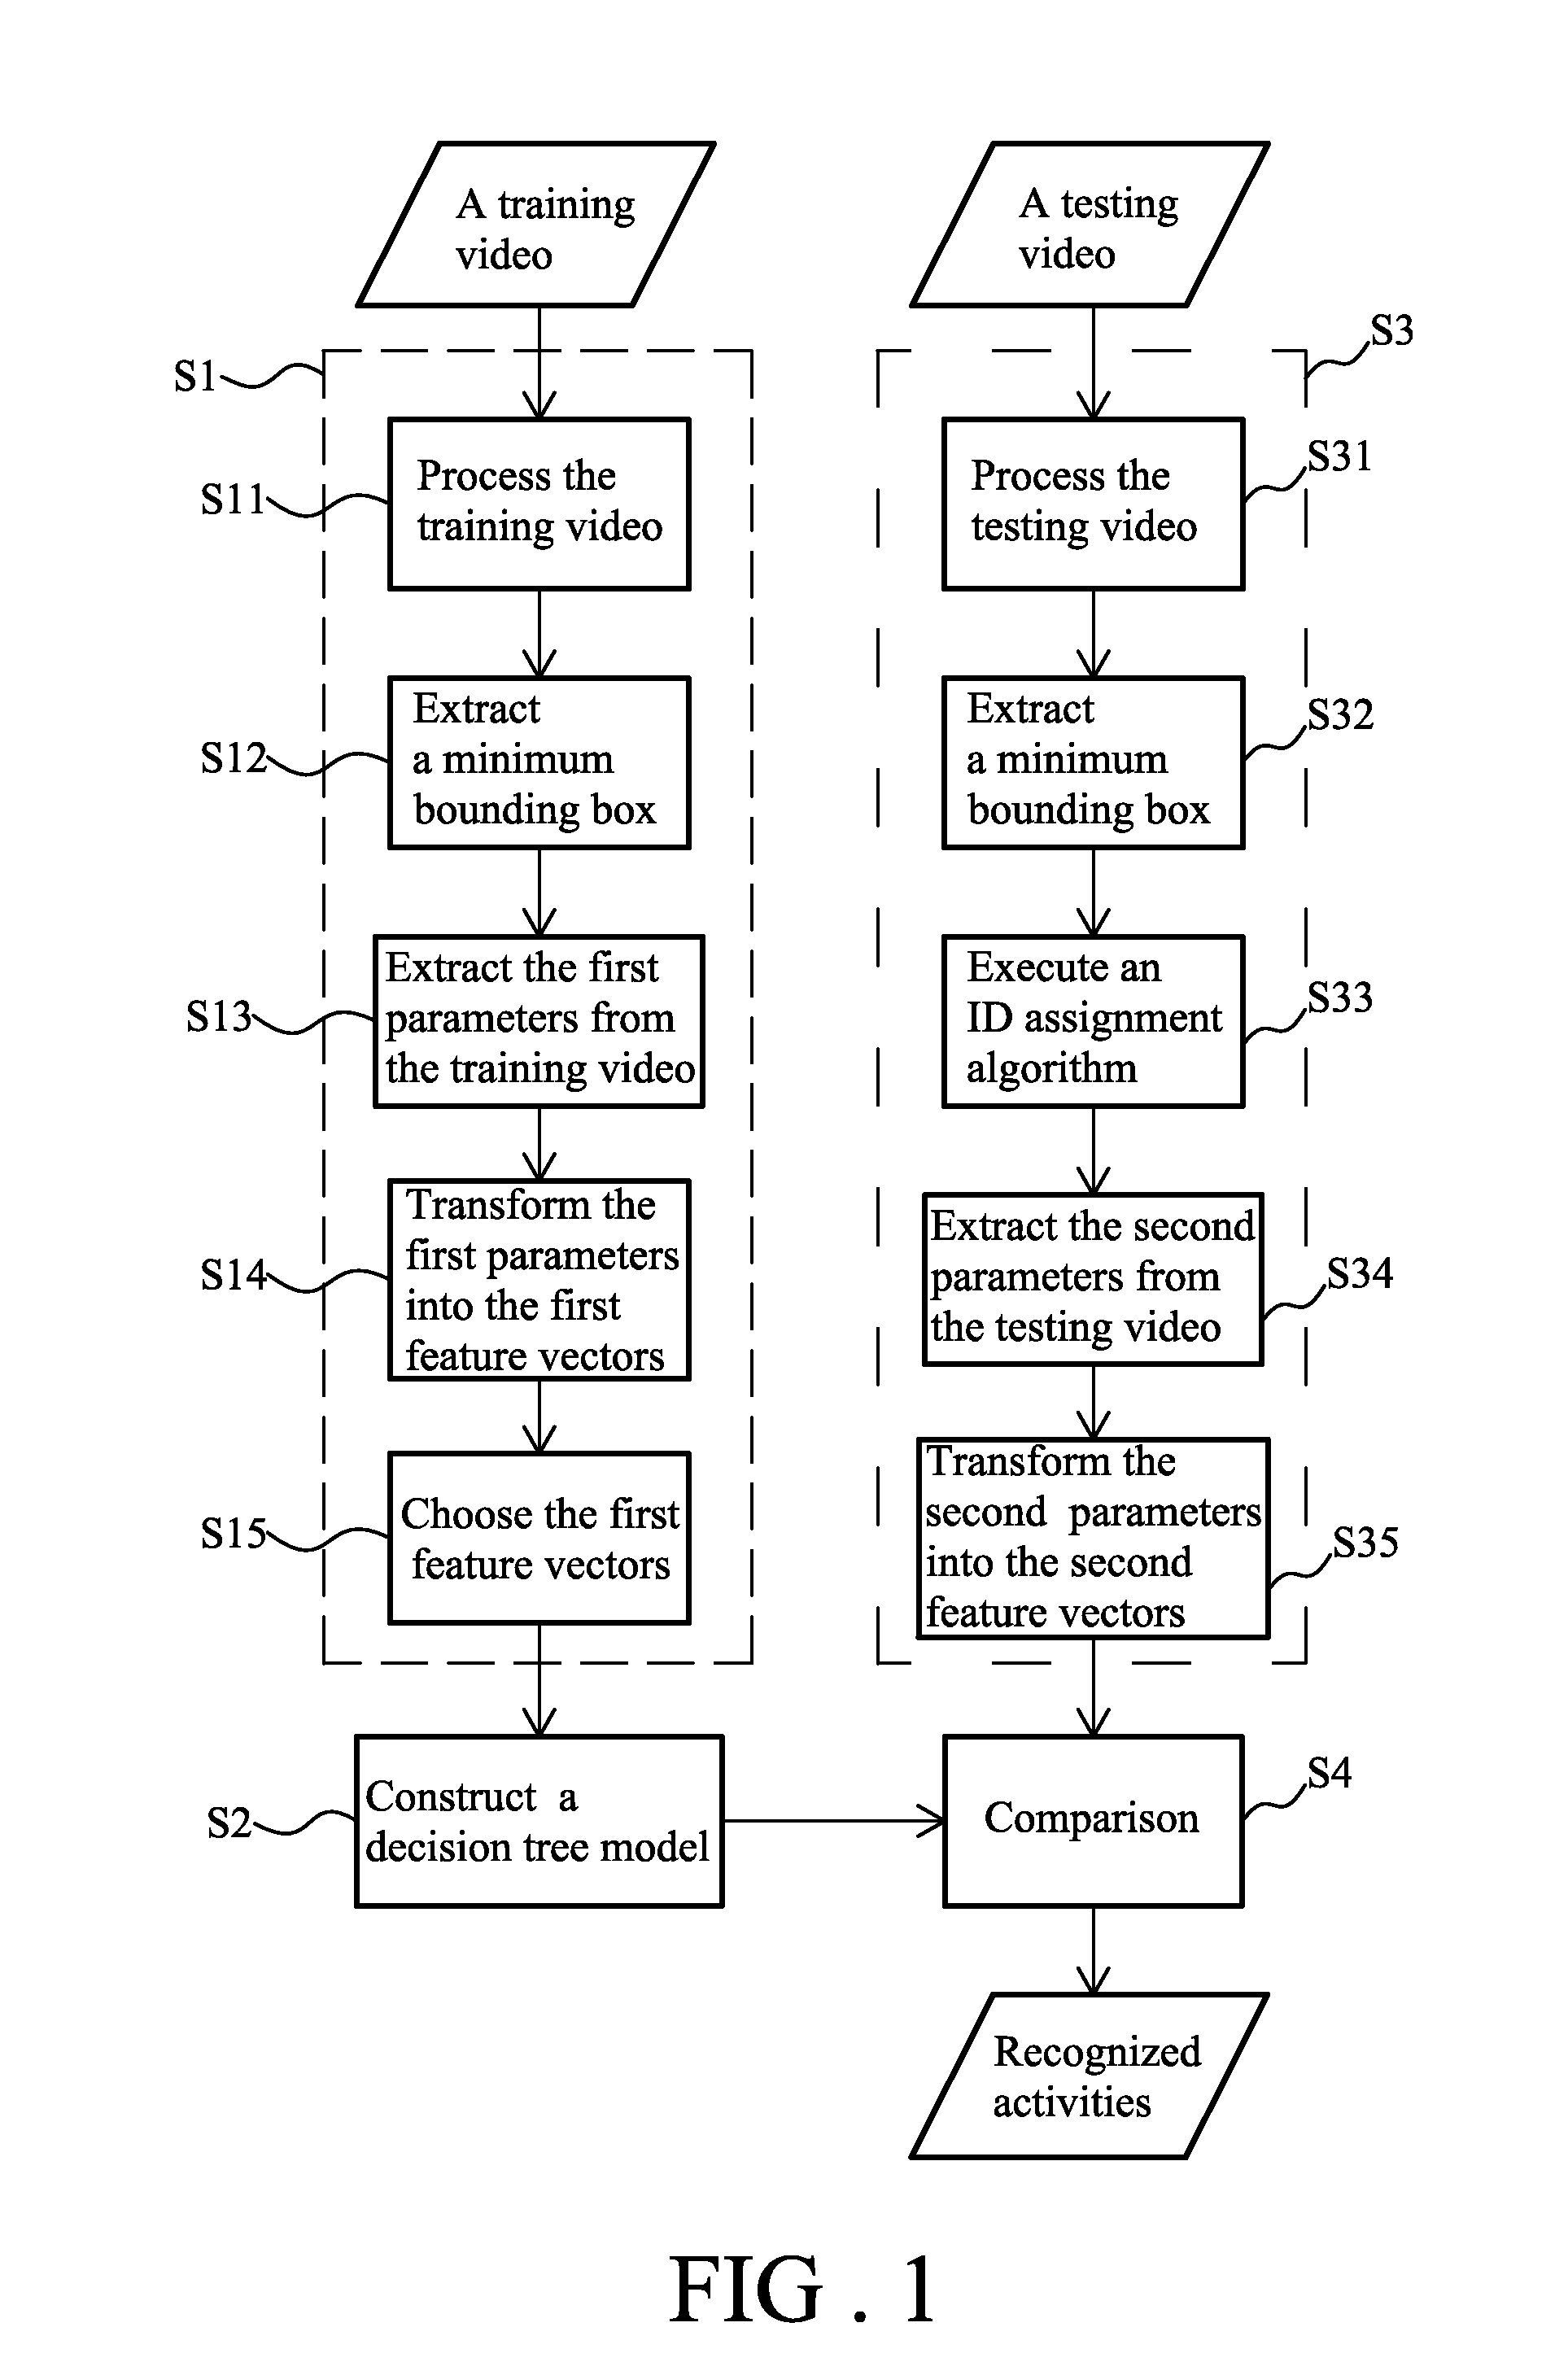 Activity recognition method